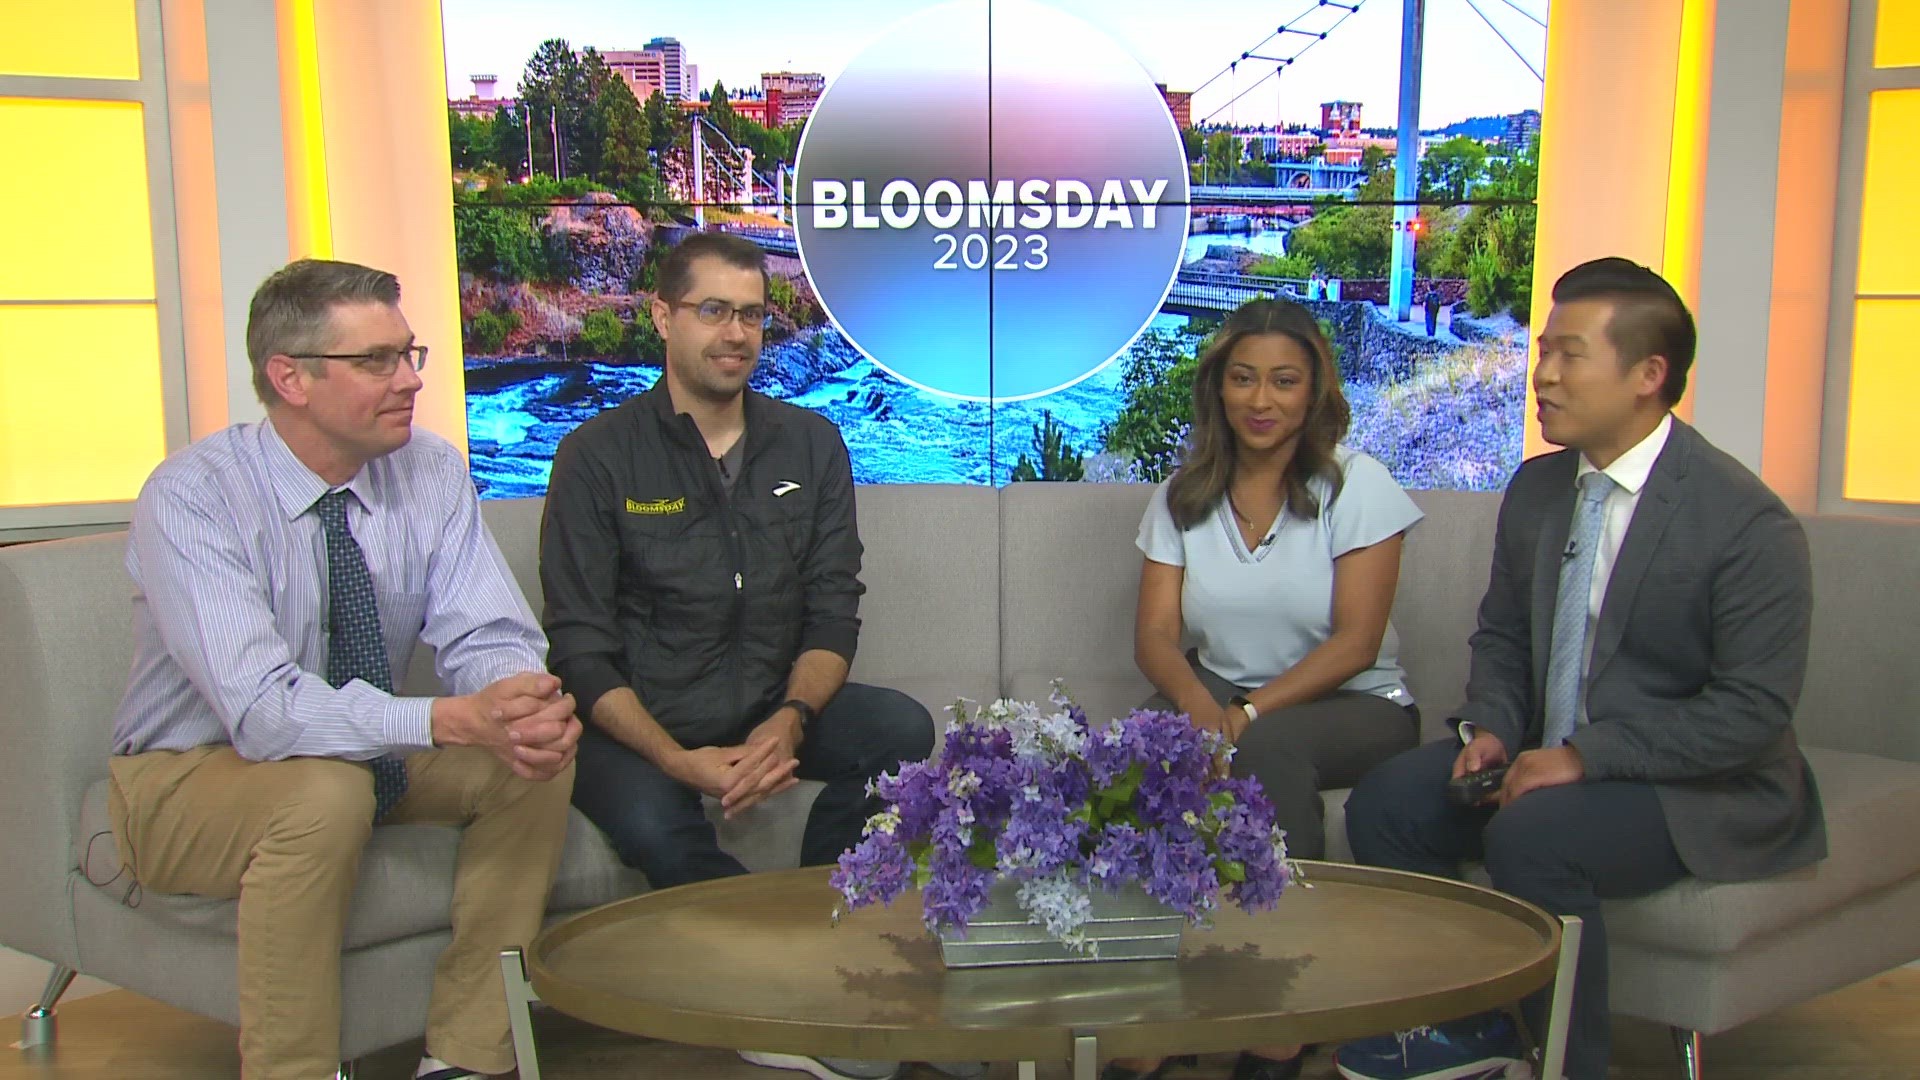 Bloomsday talks about getting local businesses involved in the Corporate Cup and some of the best team names.